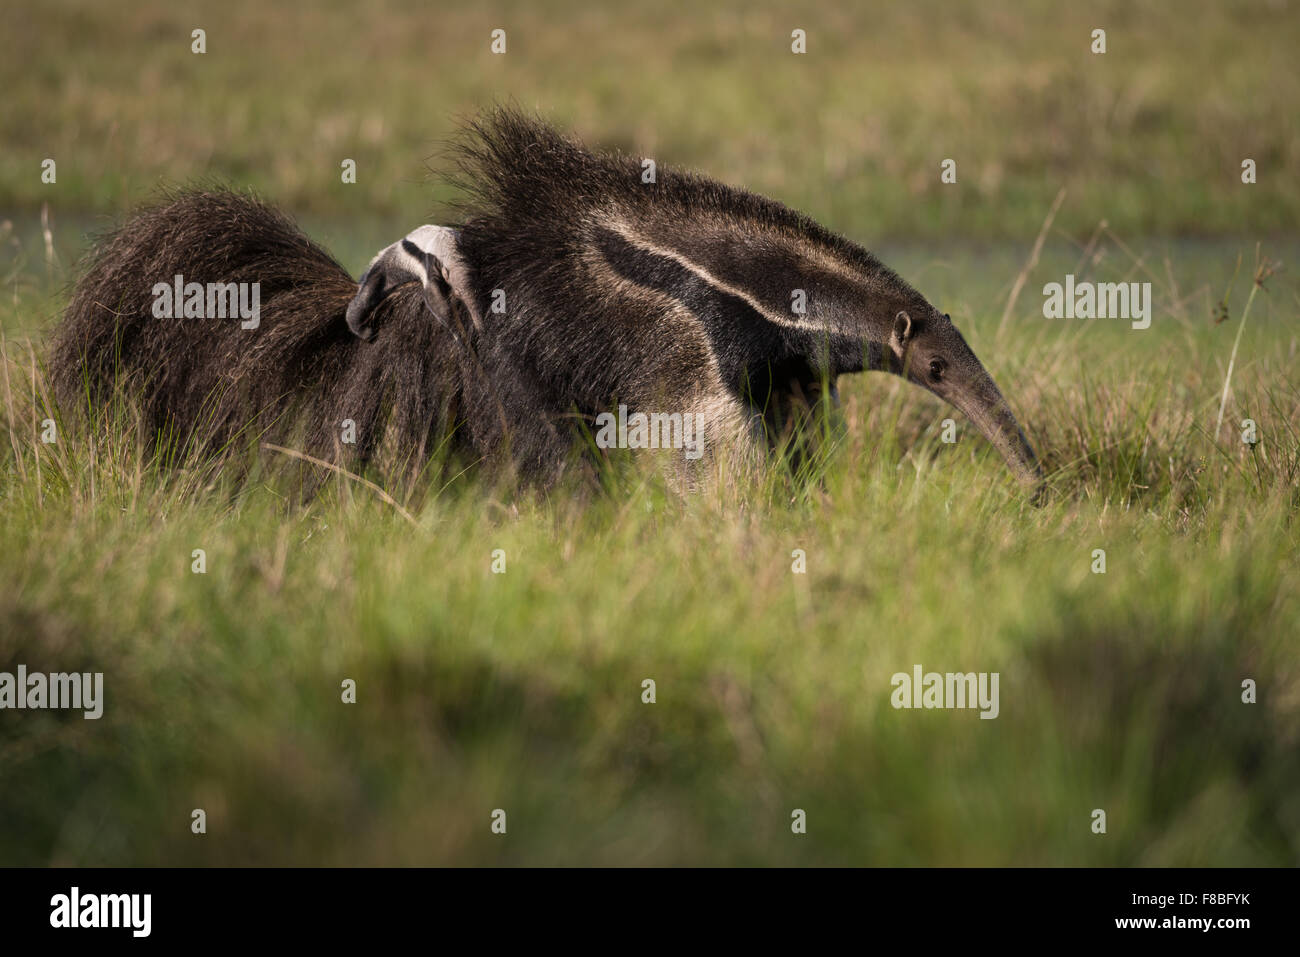 A Giant Anteater carrying a baby on its back Stock Photo